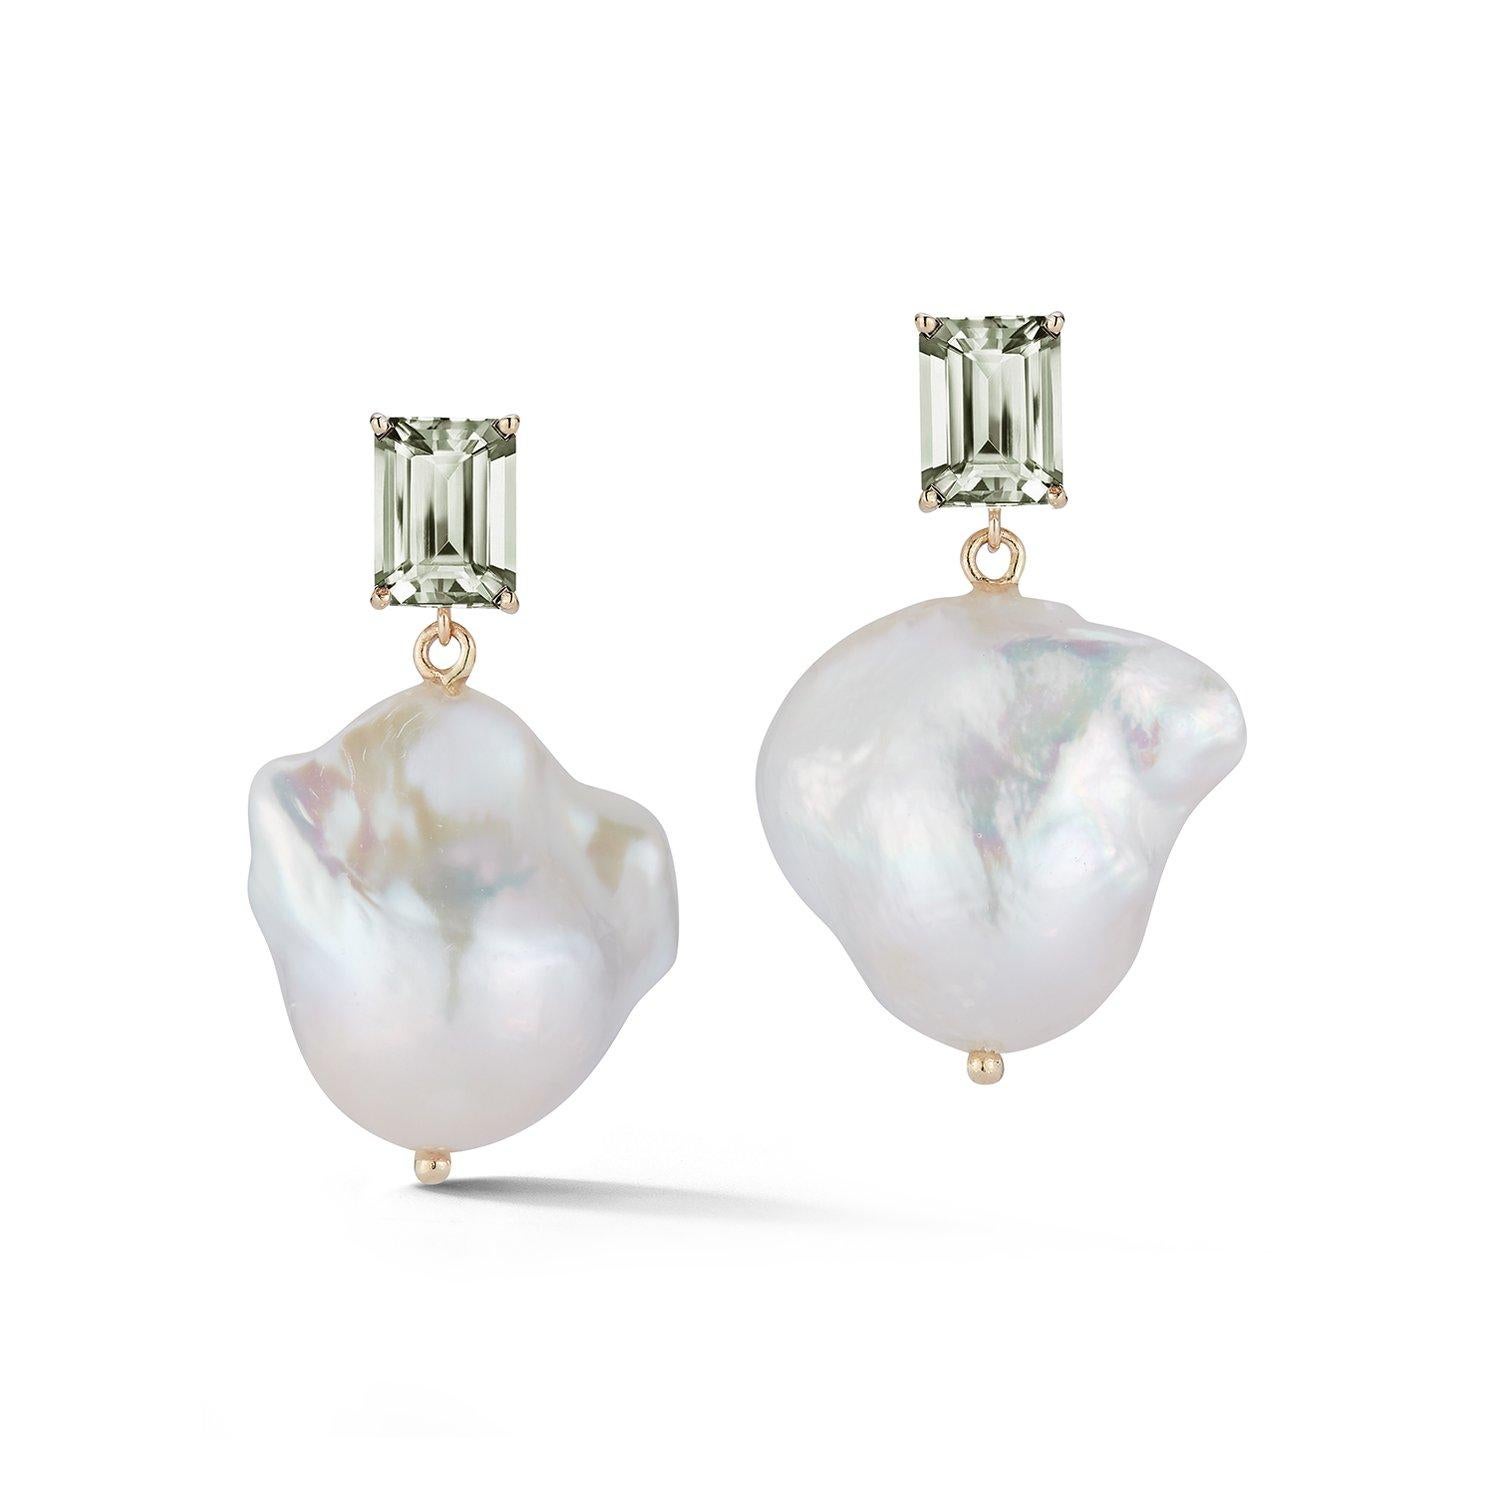 These remarkably beautiful earrings are made in New York city of 14kt yellow gold, green amethyst and one of kind baroque pearls. Mateo's obsession with baroque pearls continues using colored gemstones to compliment the pearl's luster. 